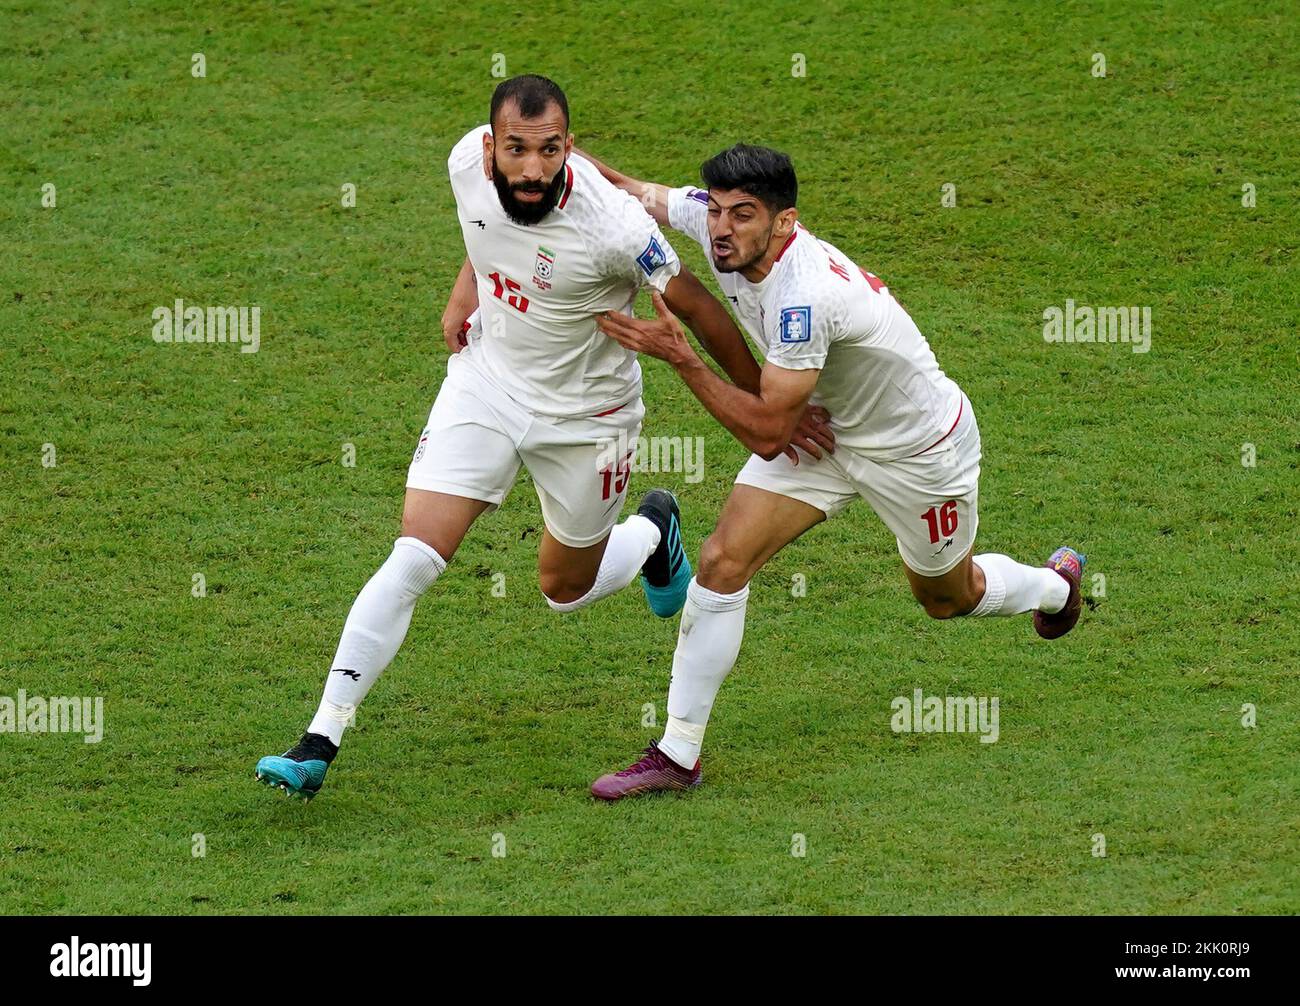 Iran's Roozbeh Cheshmi celebrates scoring the opening goal with team mate Mehdi Torabi during the FIFA World Cup Group B match at the Ahmad Bin Ali Stadium, Al-Rayyan. Picture date: Friday November 25, 2022. Stock Photo